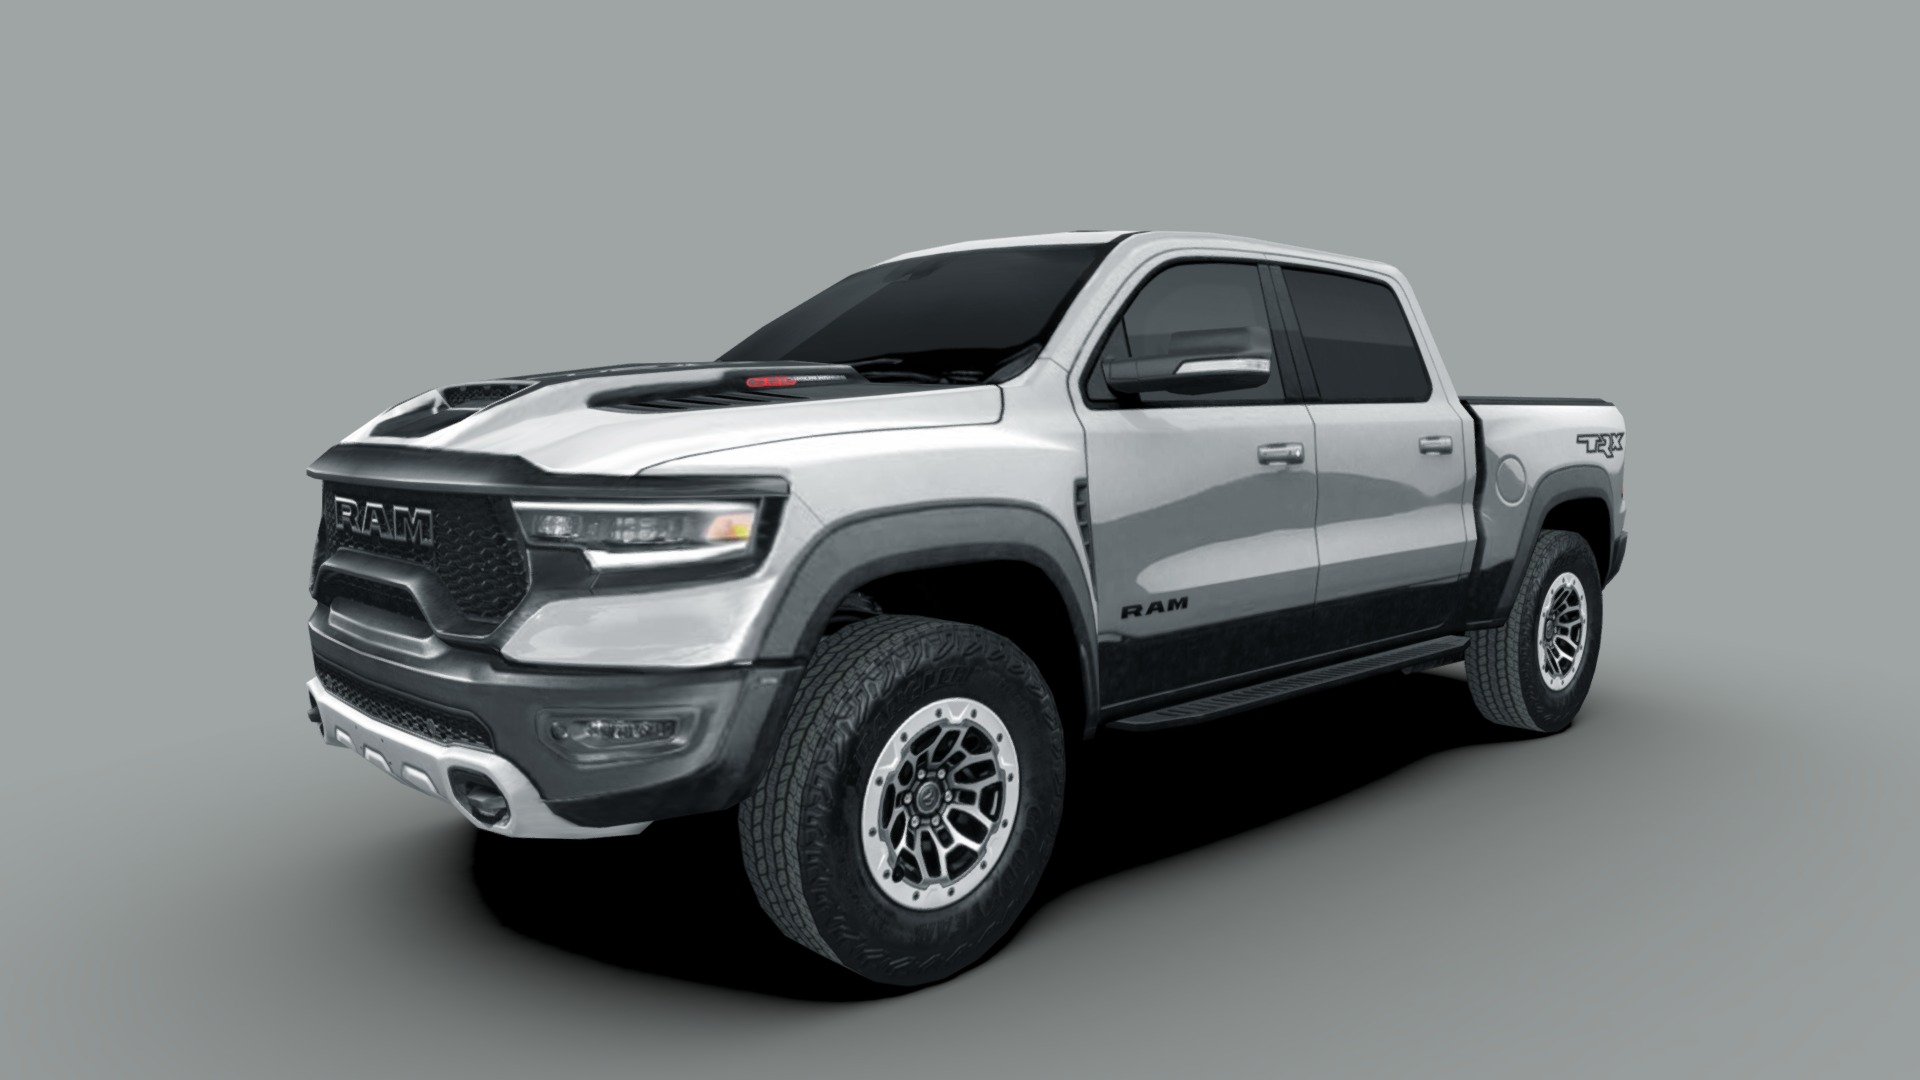 3d model of the 2021 RAM 1500 TRX, a off-road performance pickup truck

The model is very low-poly, full-scale, real photos texture (single 2048 x 2048 png).

Package includes 5 file formats and texture (3ds, fbx, dae, obj and skp)

Hope you enjoy it.

José Bronze - RAM 1500 TRX 2021 - Buy Royalty Free 3D model by Jose Bronze (@pinceladas3d) 3d model